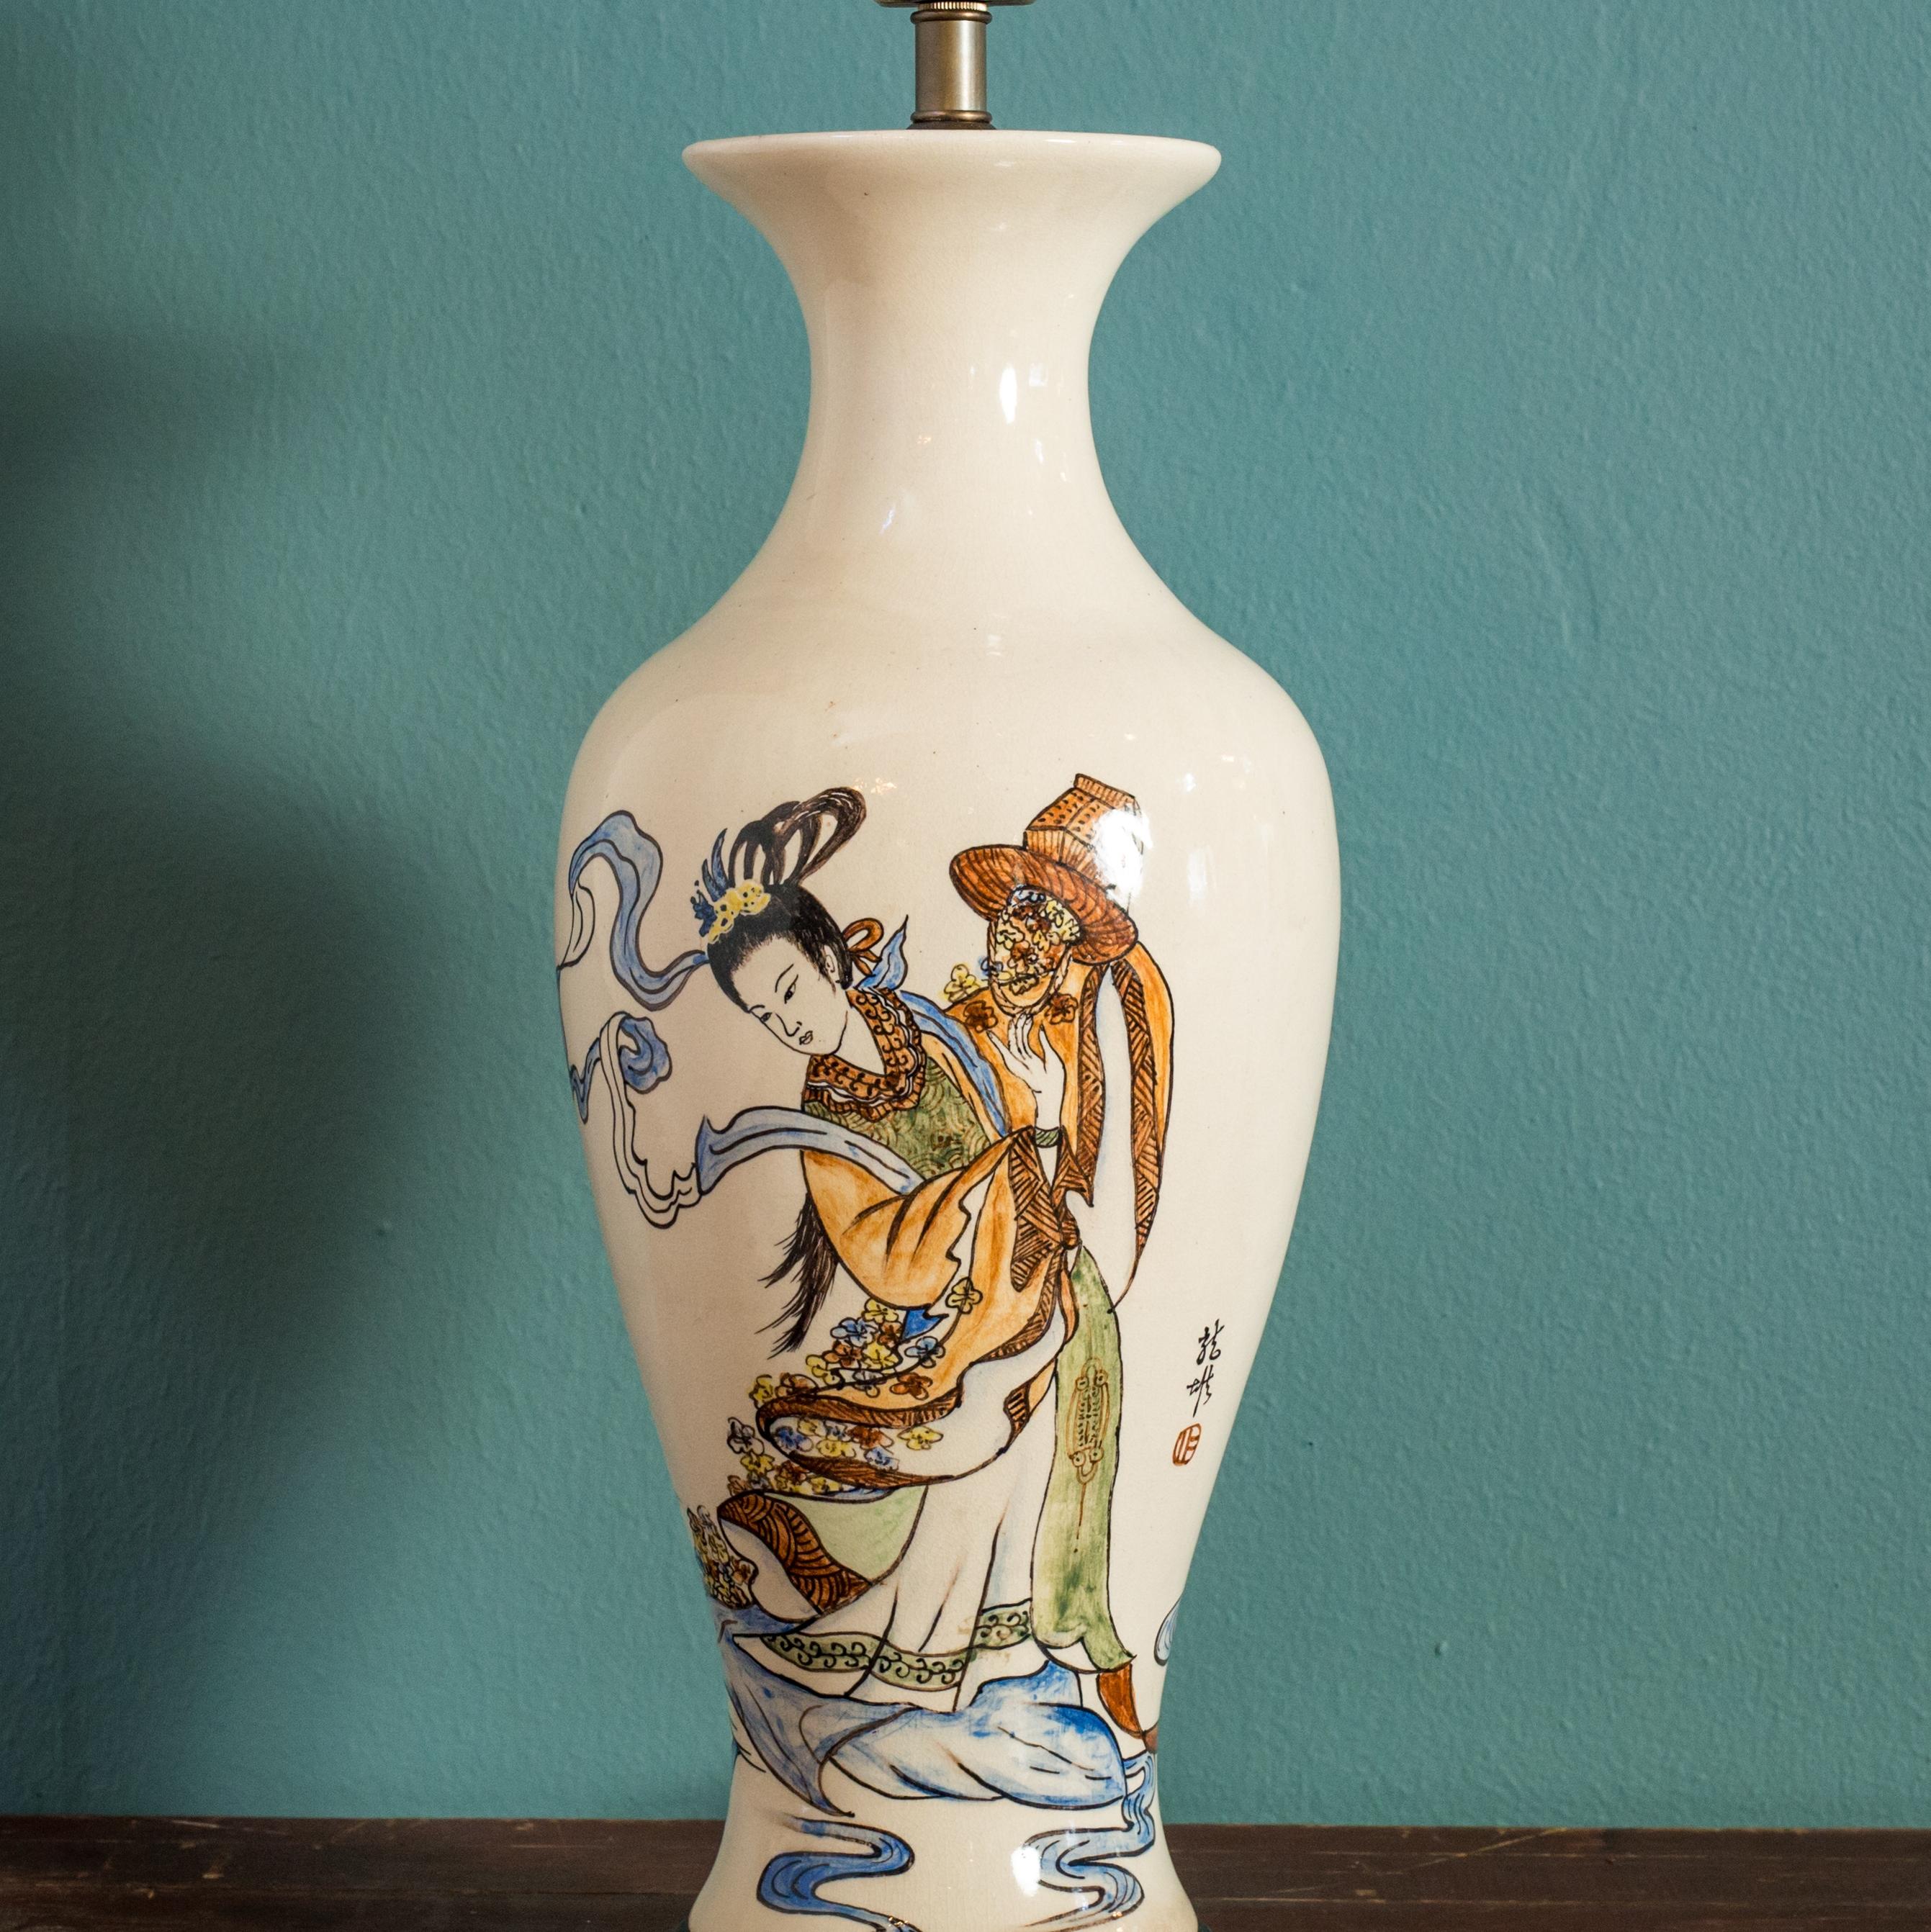 Japonisme Antique Japanese Painted Vase Table Lamp.  Cream Ceramic with Painted Figures. For Sale